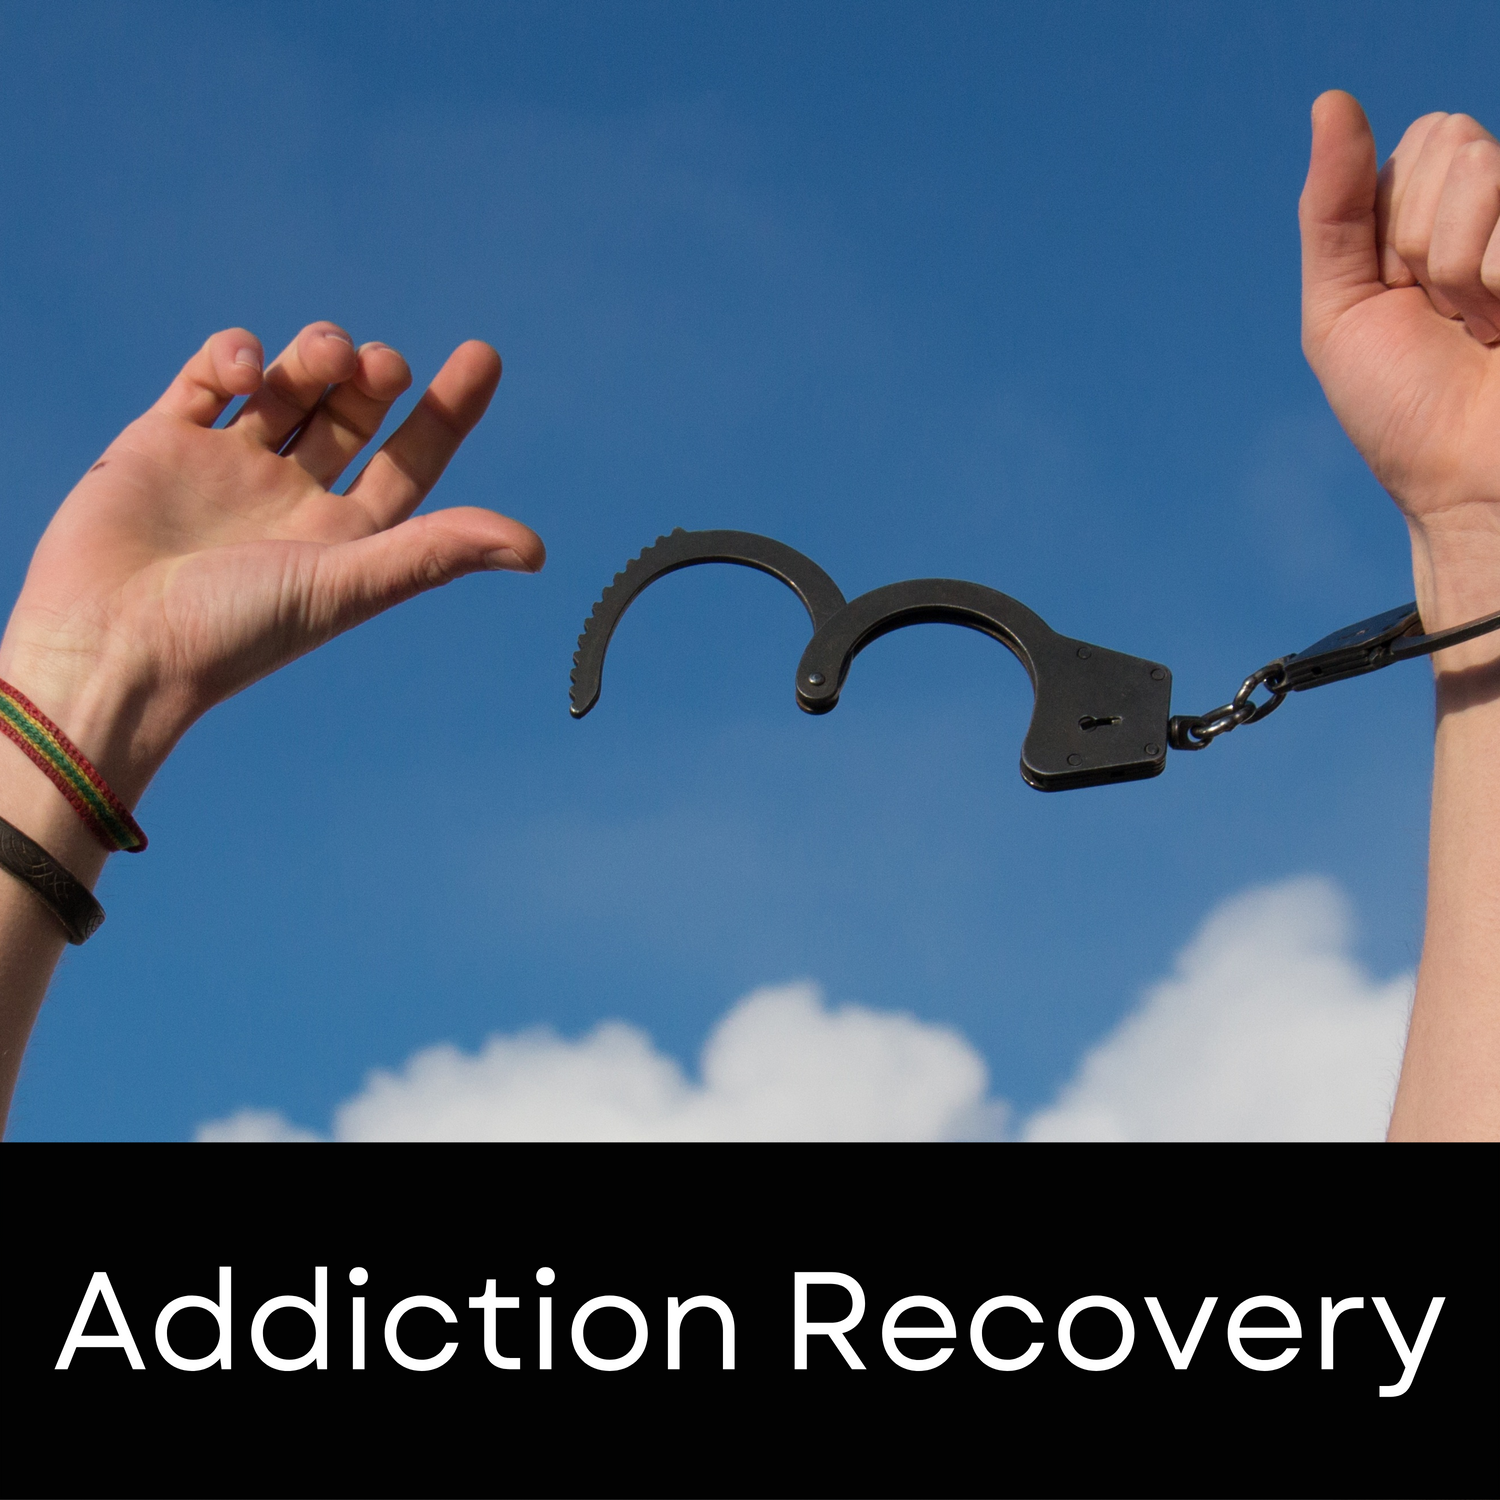 Addiction recovery, breaking free from handcuffs